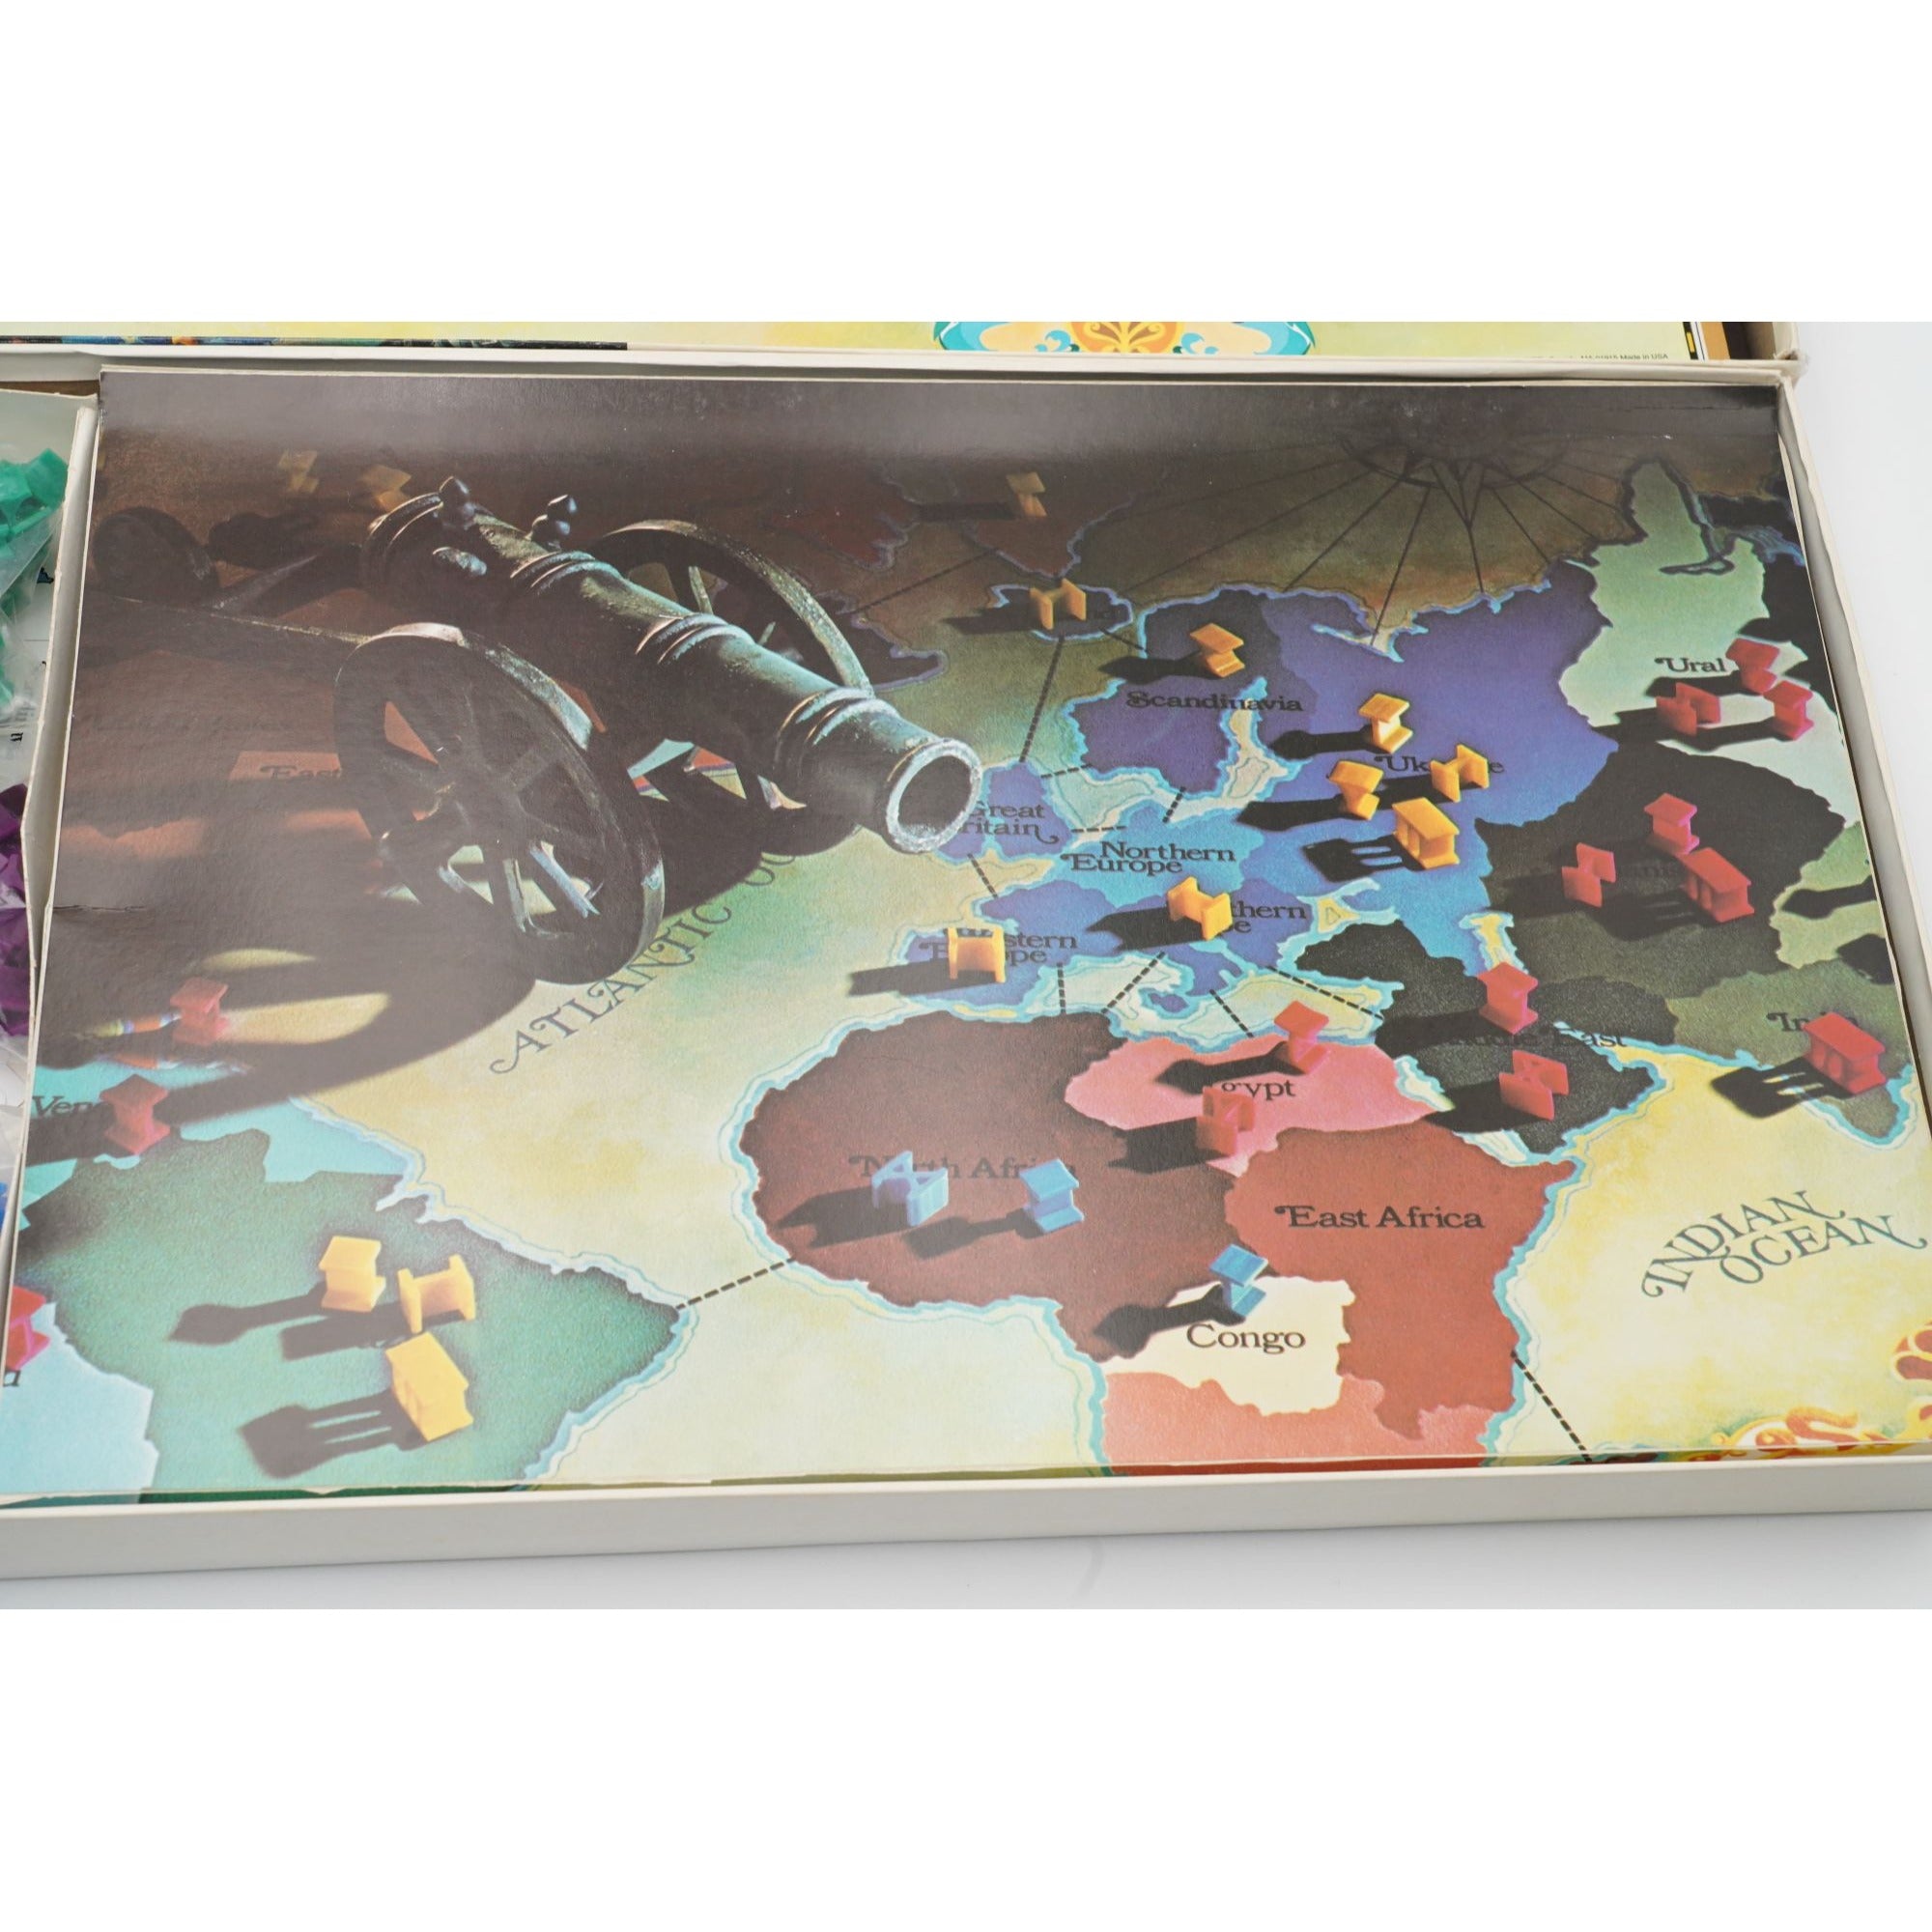 Vintage 1980 RISK Parker Brothers World Conquest Board Game 2 to 6 Players